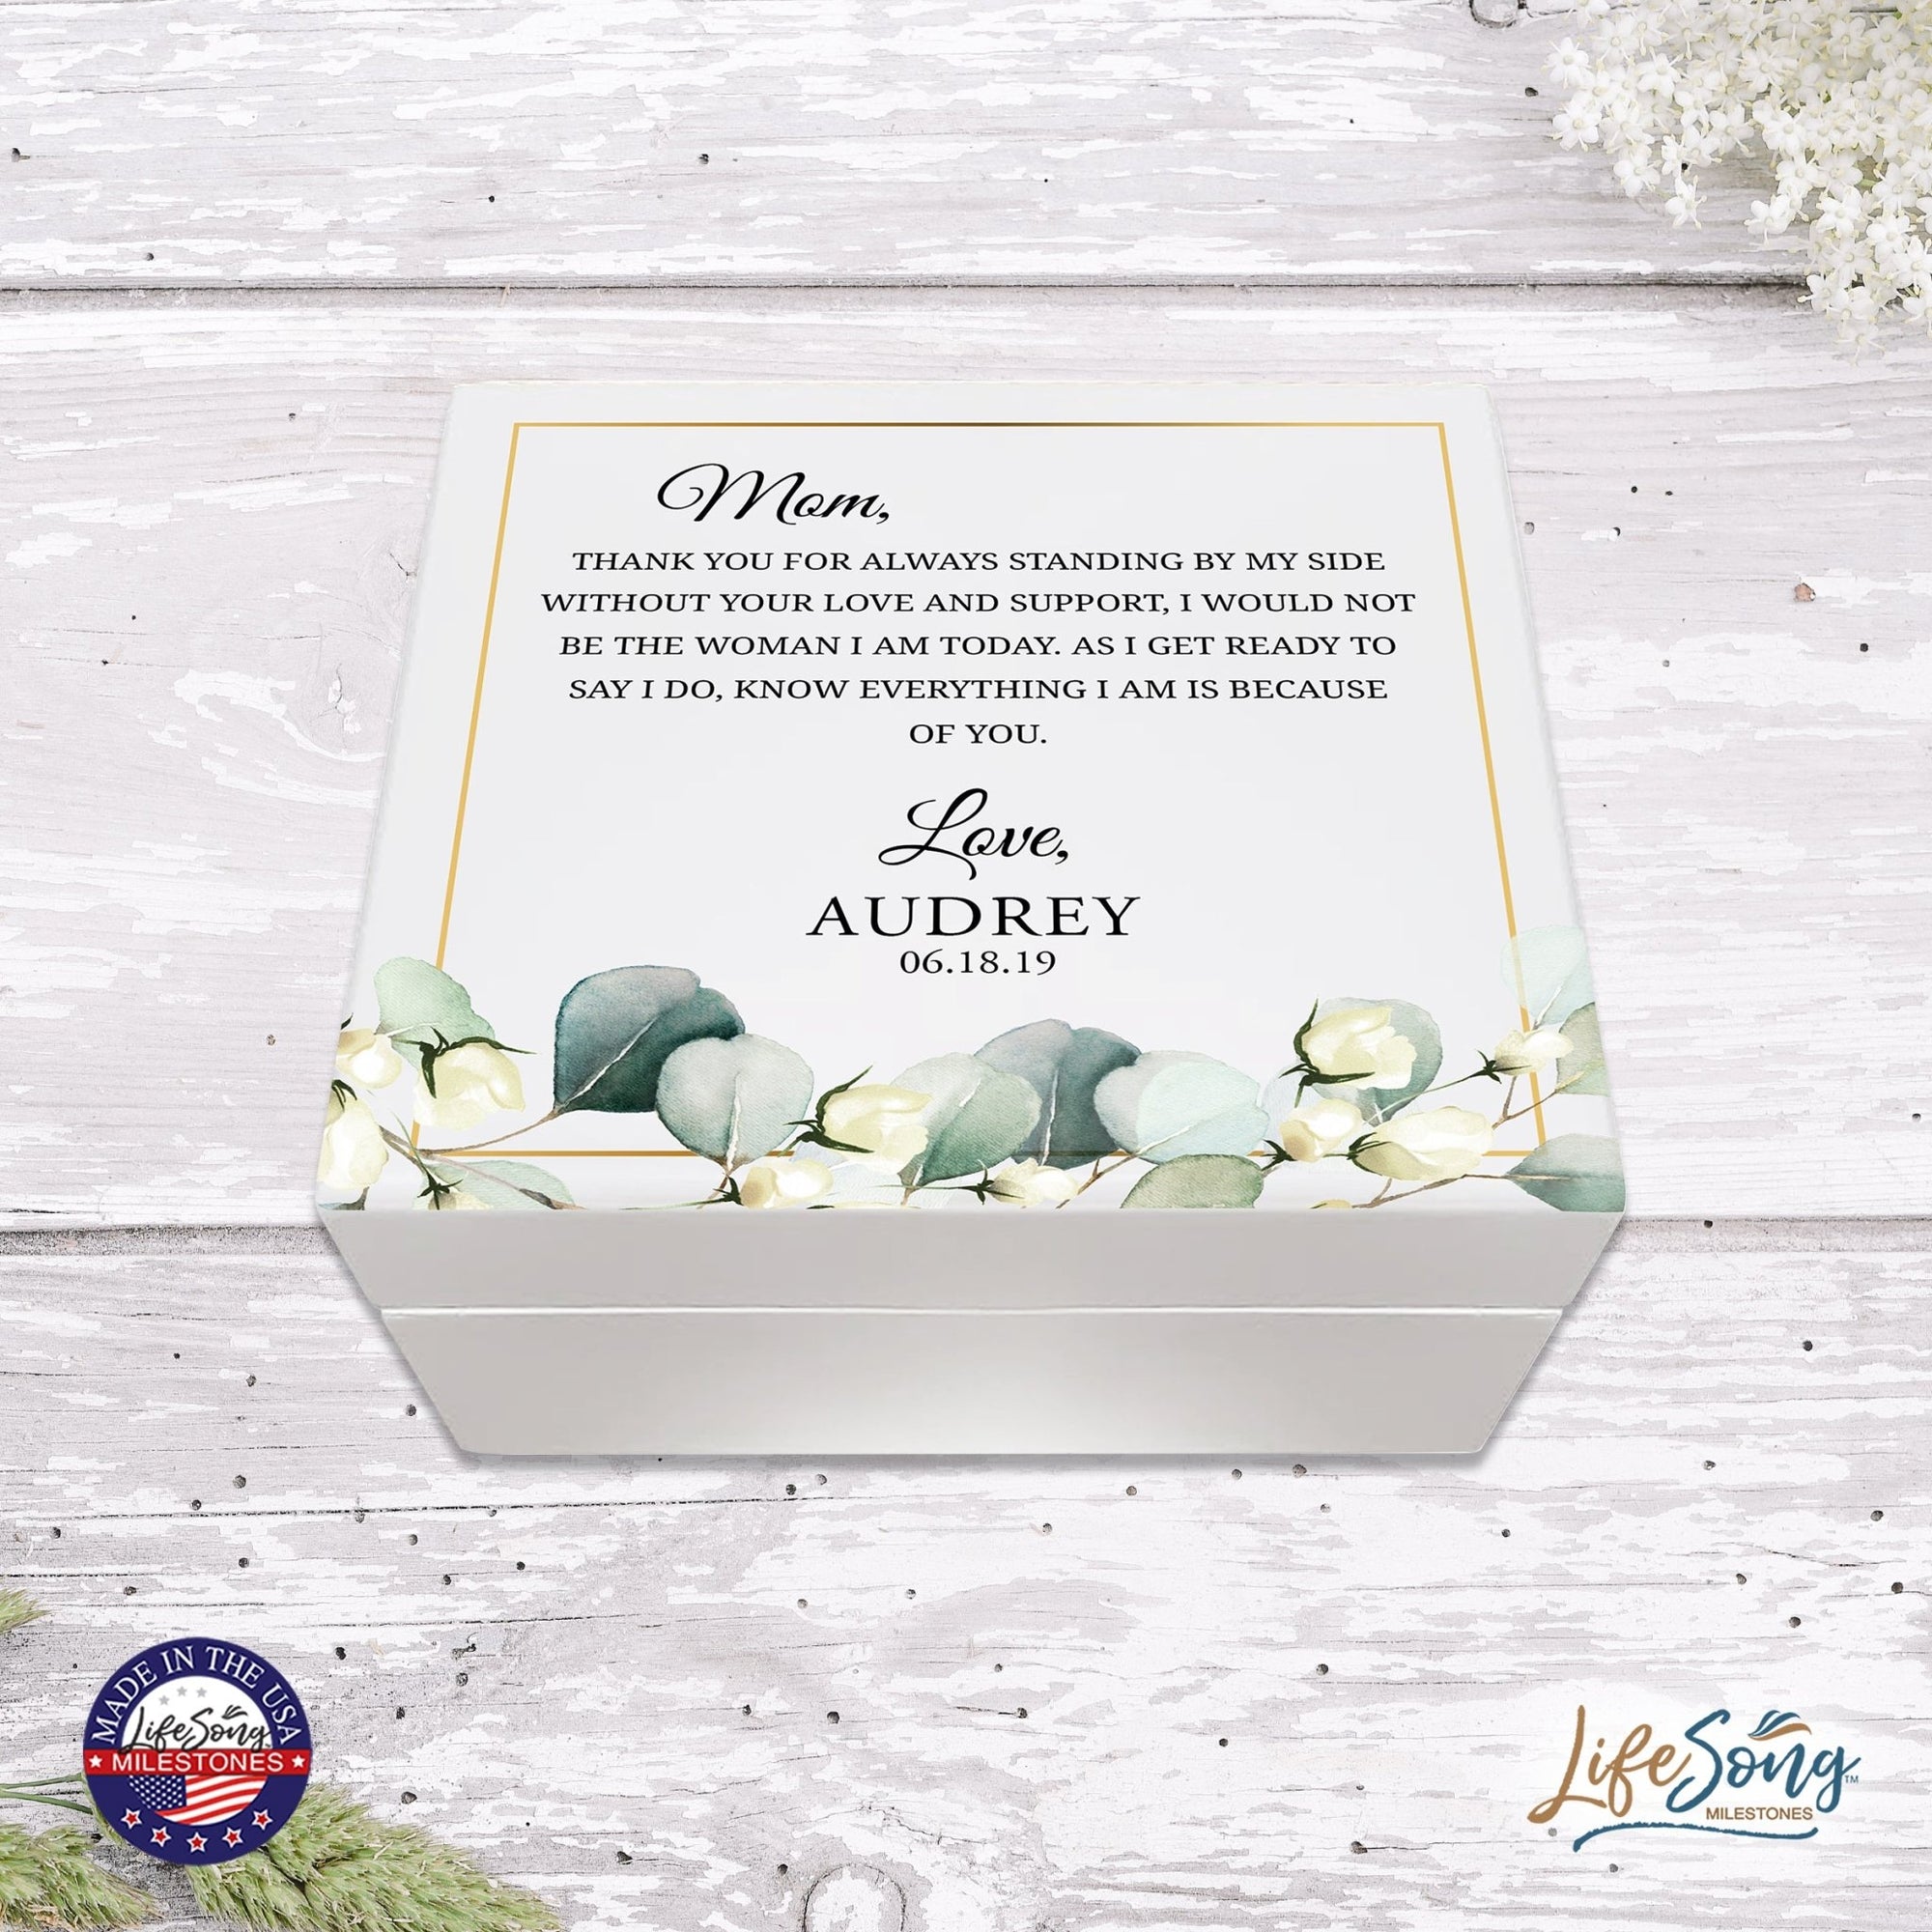 Personalized Memorable Mother’s White Keepsake Box 6x5.5 with inspiring verse - Thank You - LifeSong Milestones